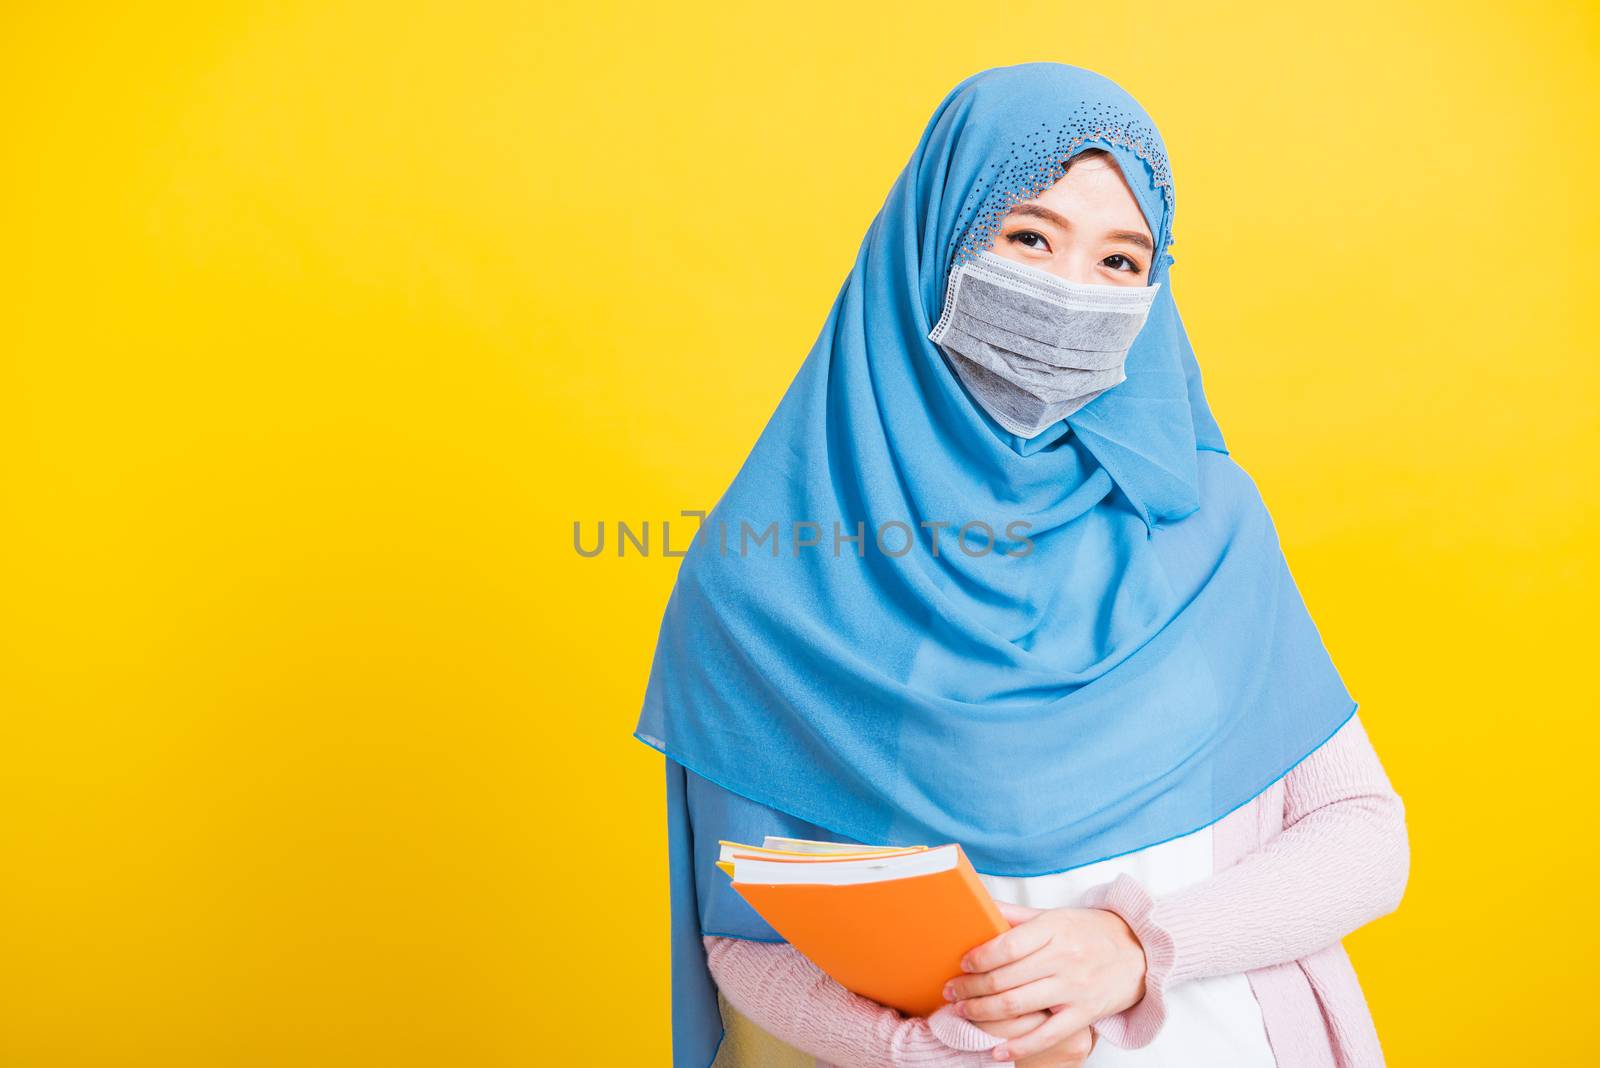 Woman religious wear veil hijab and face mask protective to prev by Sorapop